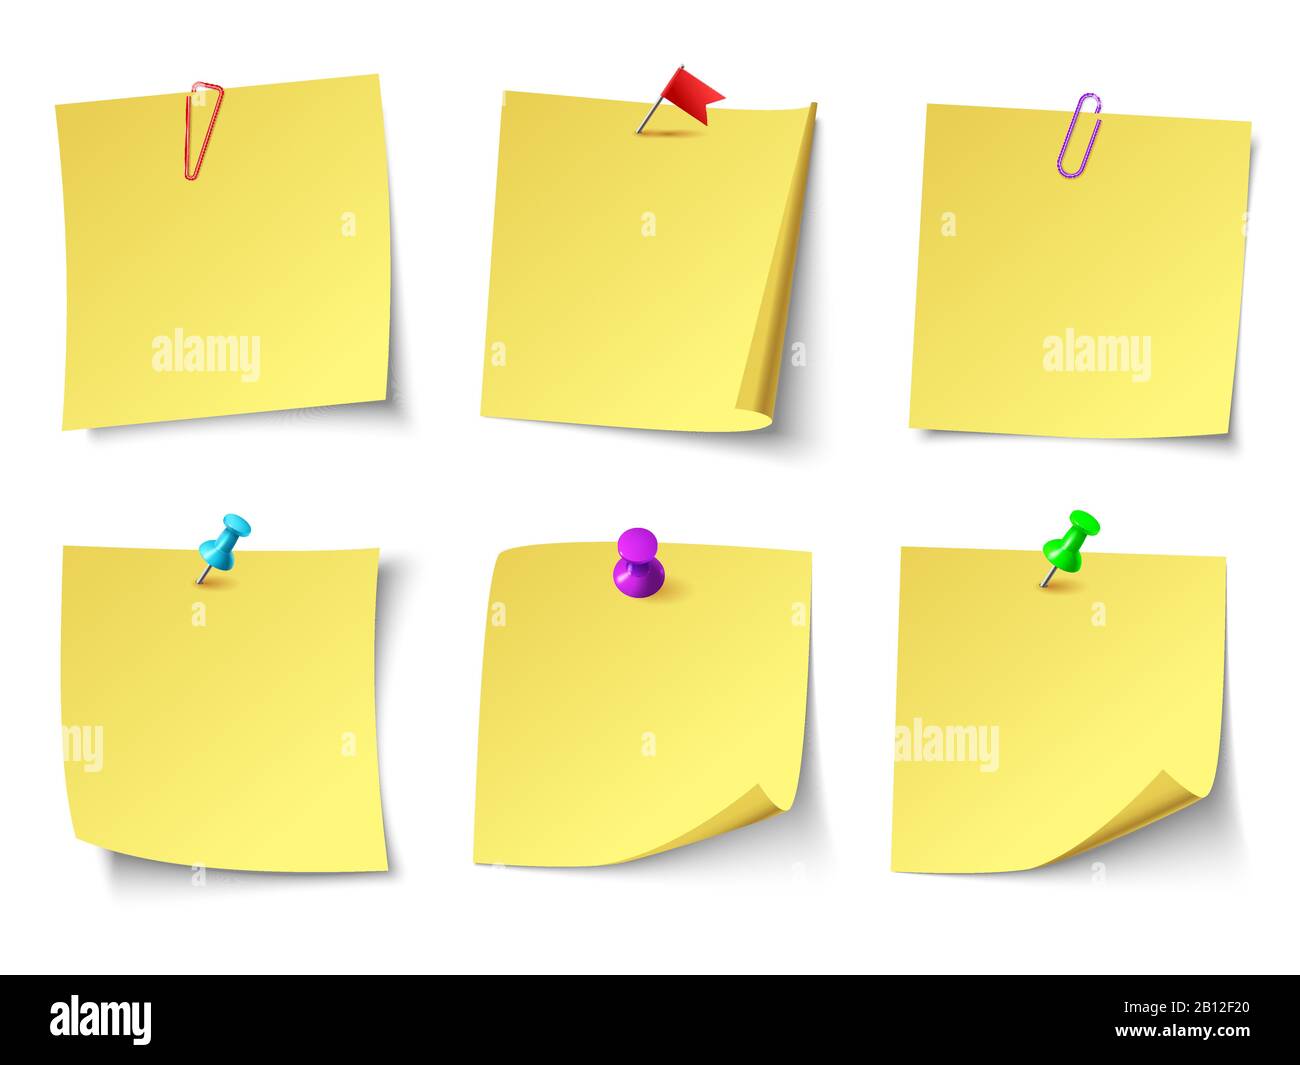 Post It Note PNG - Editable Post It Note, Post It Note Graphic, Post It  Note Background, Funny Office Post It Notes, Post It Notes Funny, Post It  Notes For PowerPoint, Pink